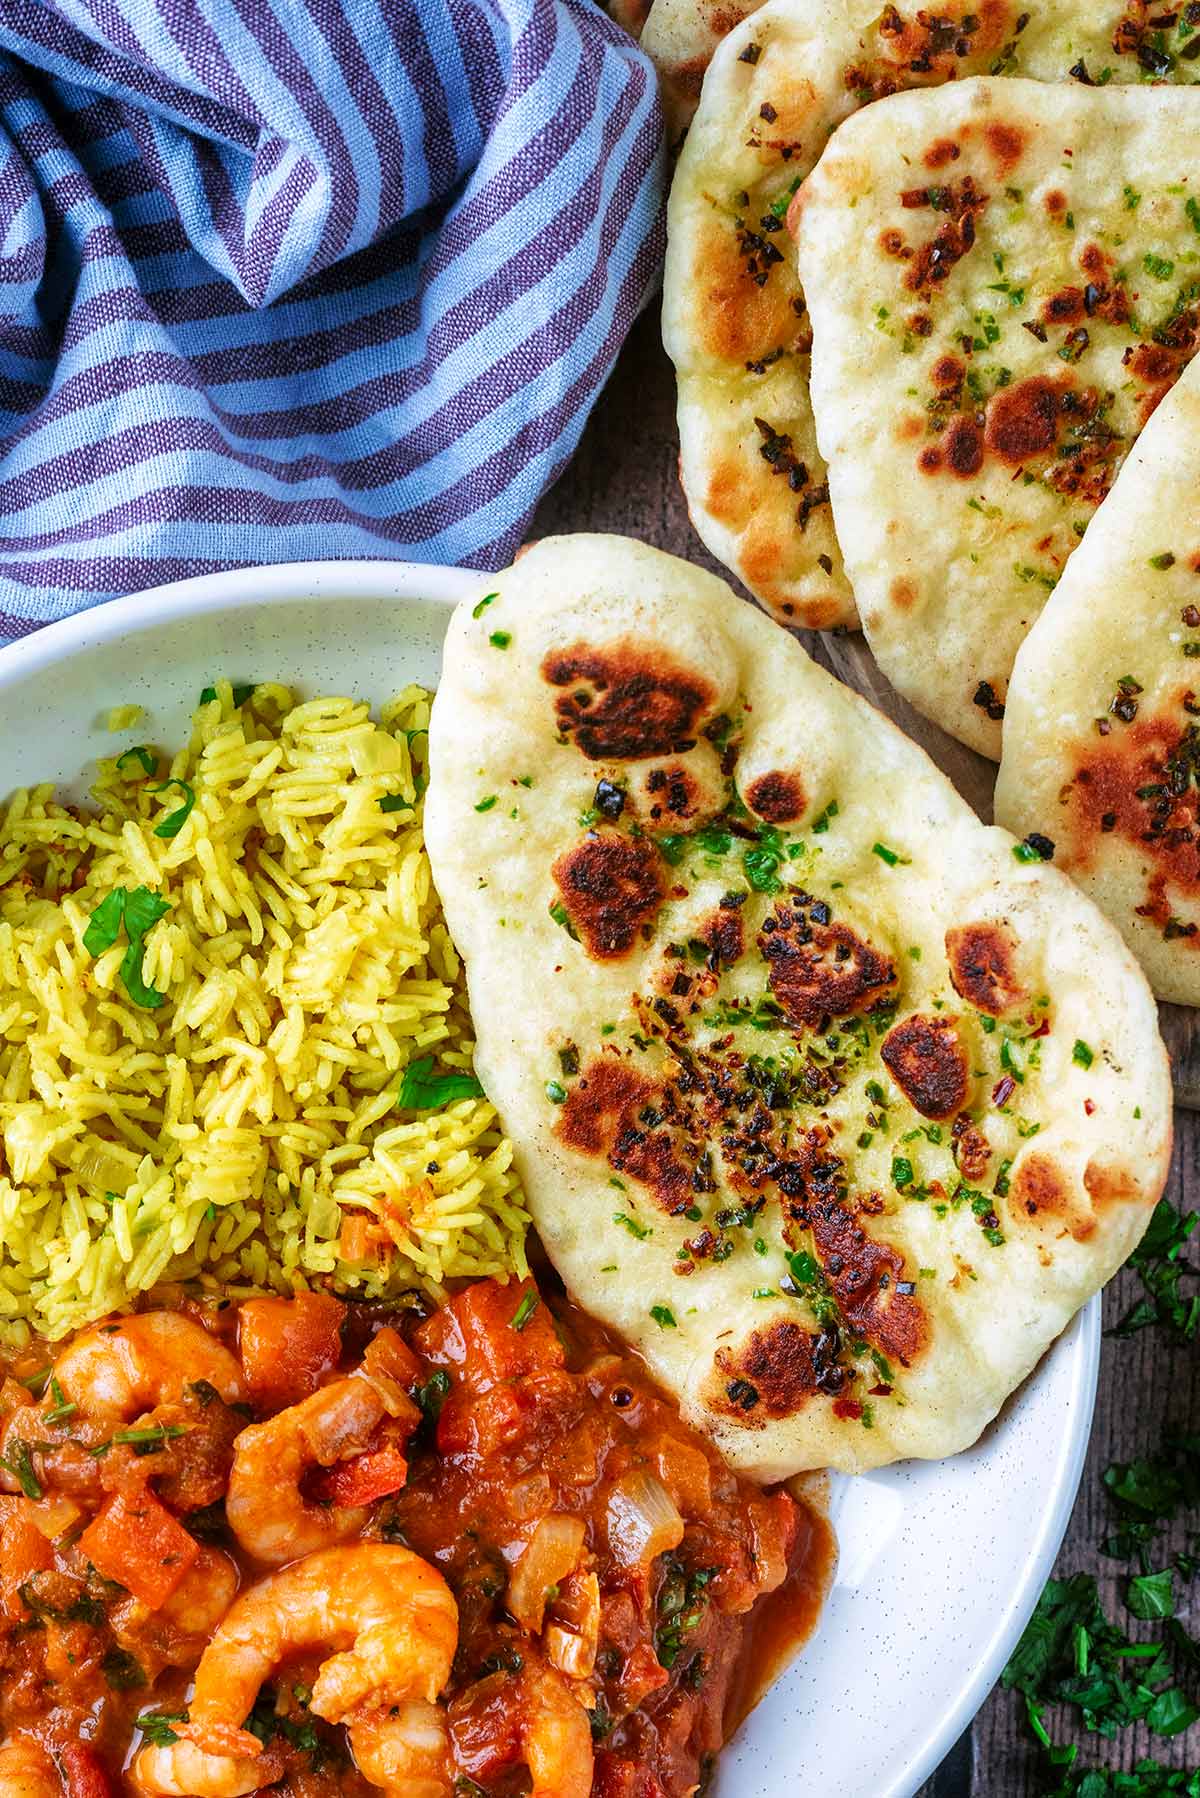 A naan bread sat on the side of a bowl of prawn curry and rice.